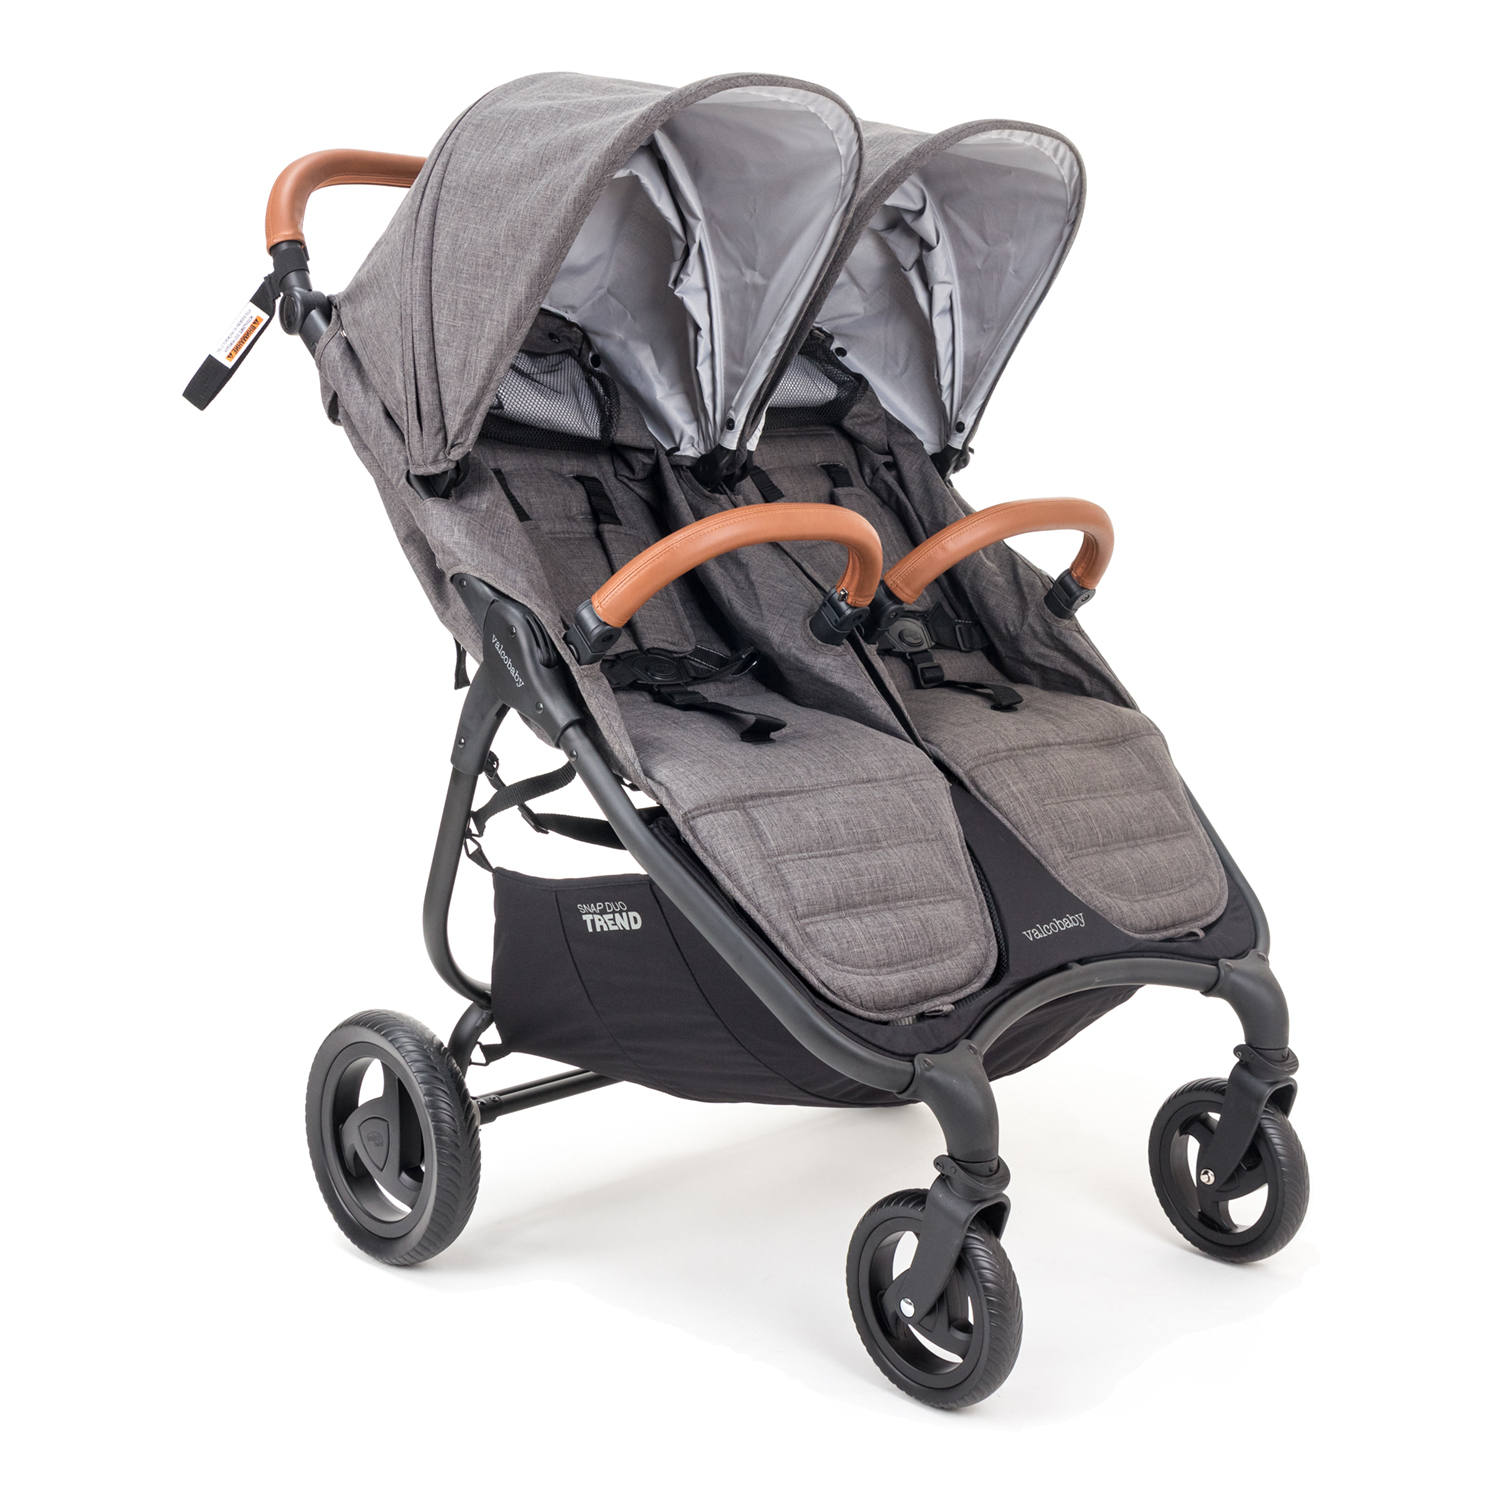 Прогулочная коляска Snap Duo Trend / Charcoal Valco Baby прогулочная коляска egg stroller